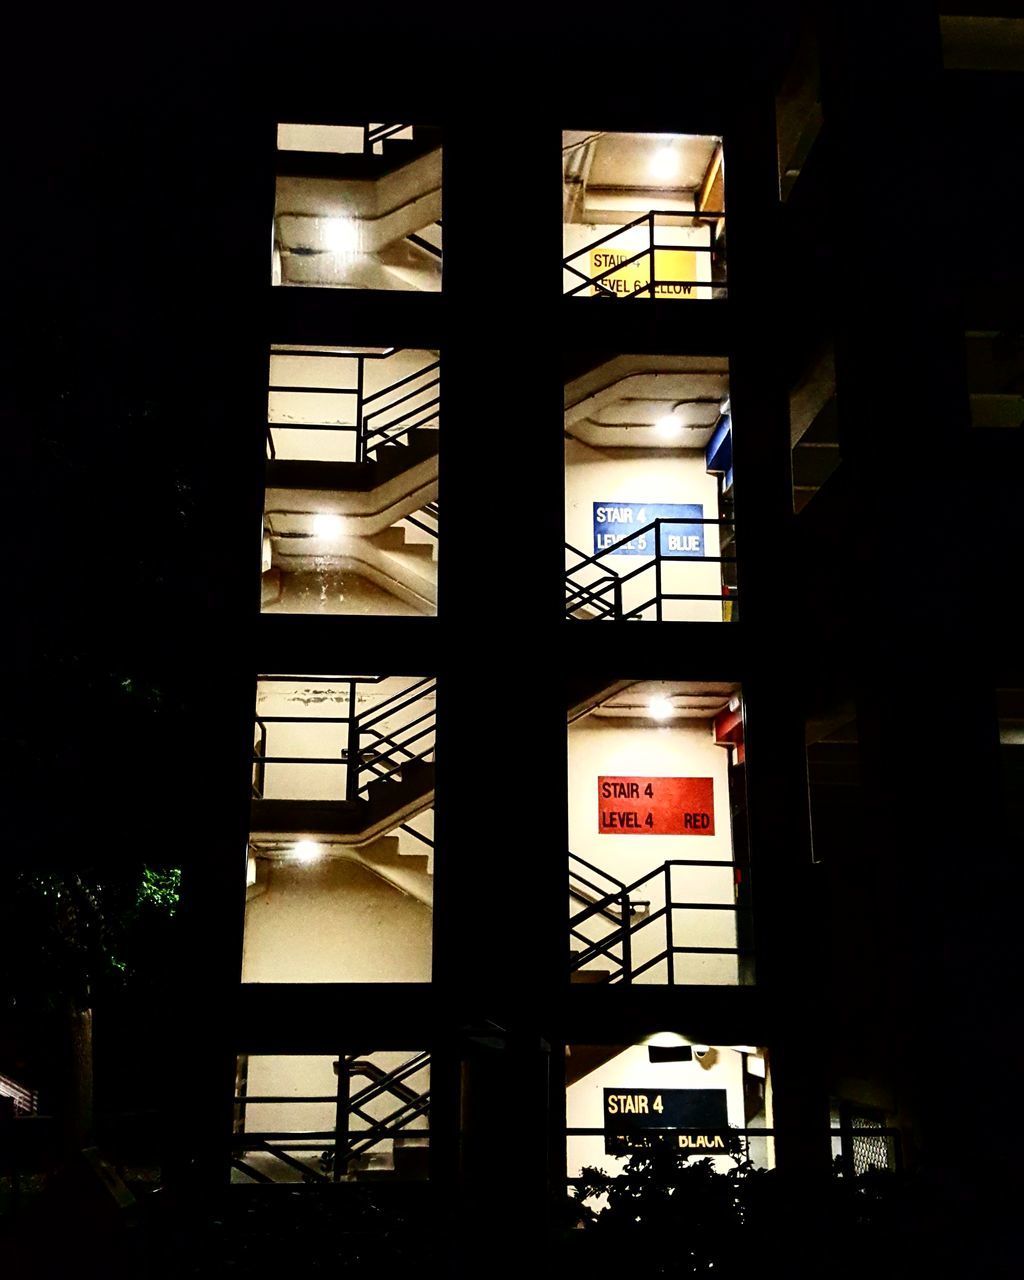 LOW ANGLE VIEW OF ILLUMINATED BUILDING